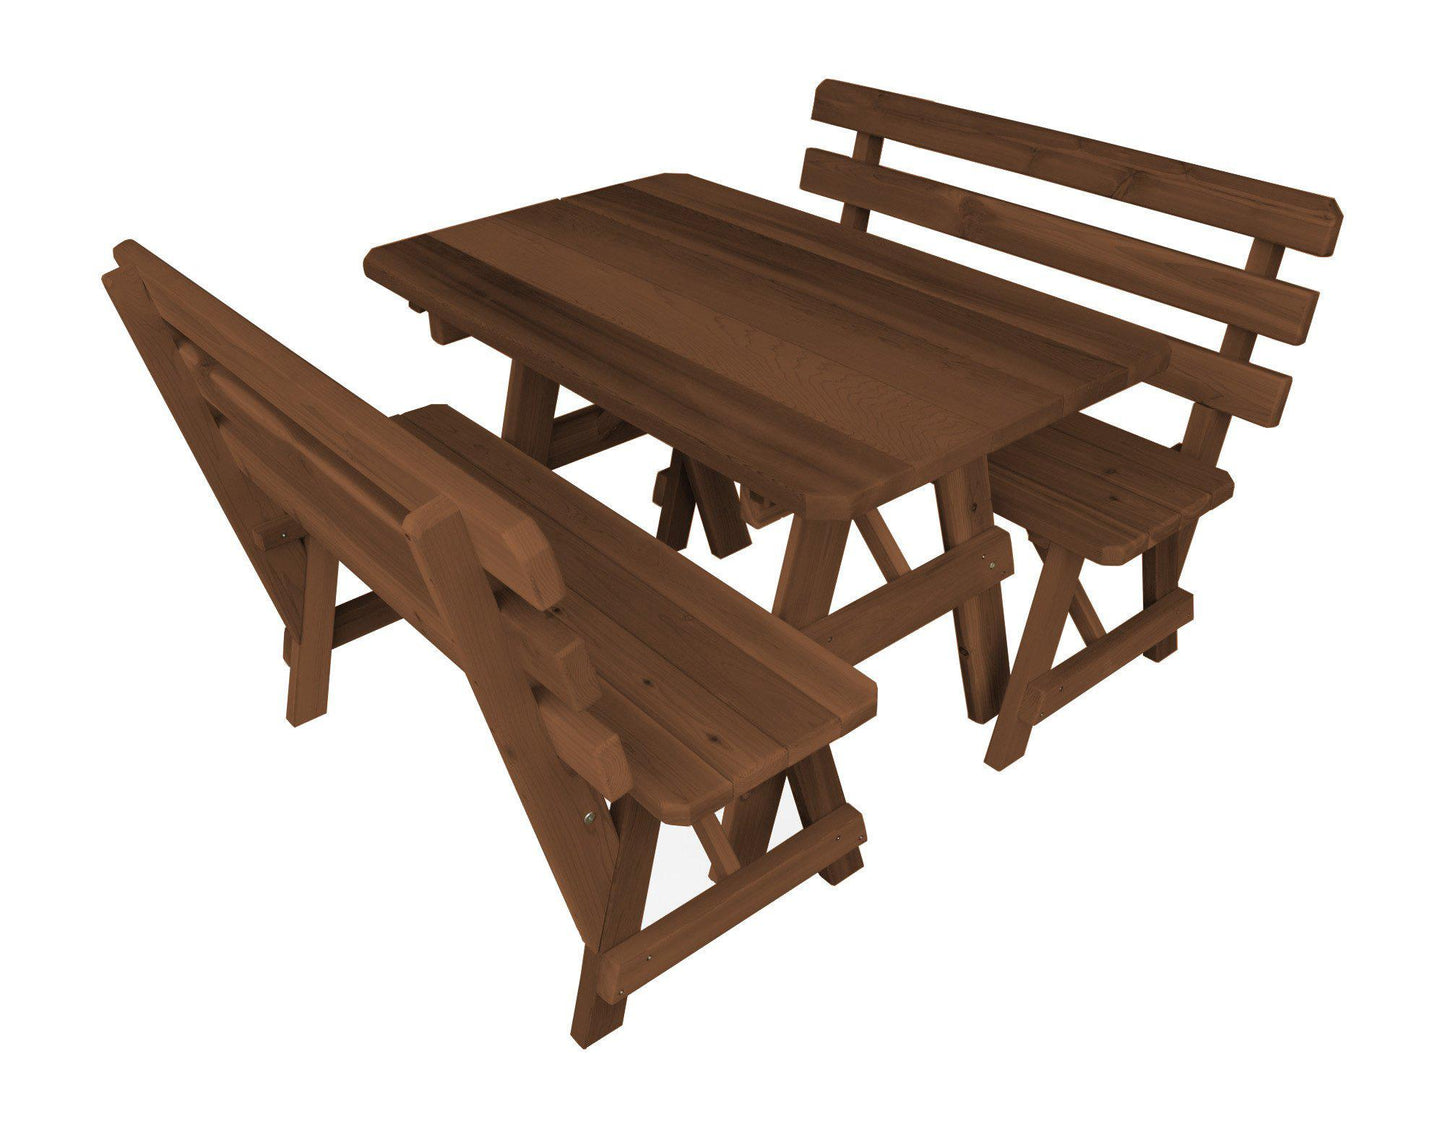 Regallion Outdoor Western Red Cedar 94" Table w/2 Backed Benches - LEAD TIME TO SHIP 2 WEEKS